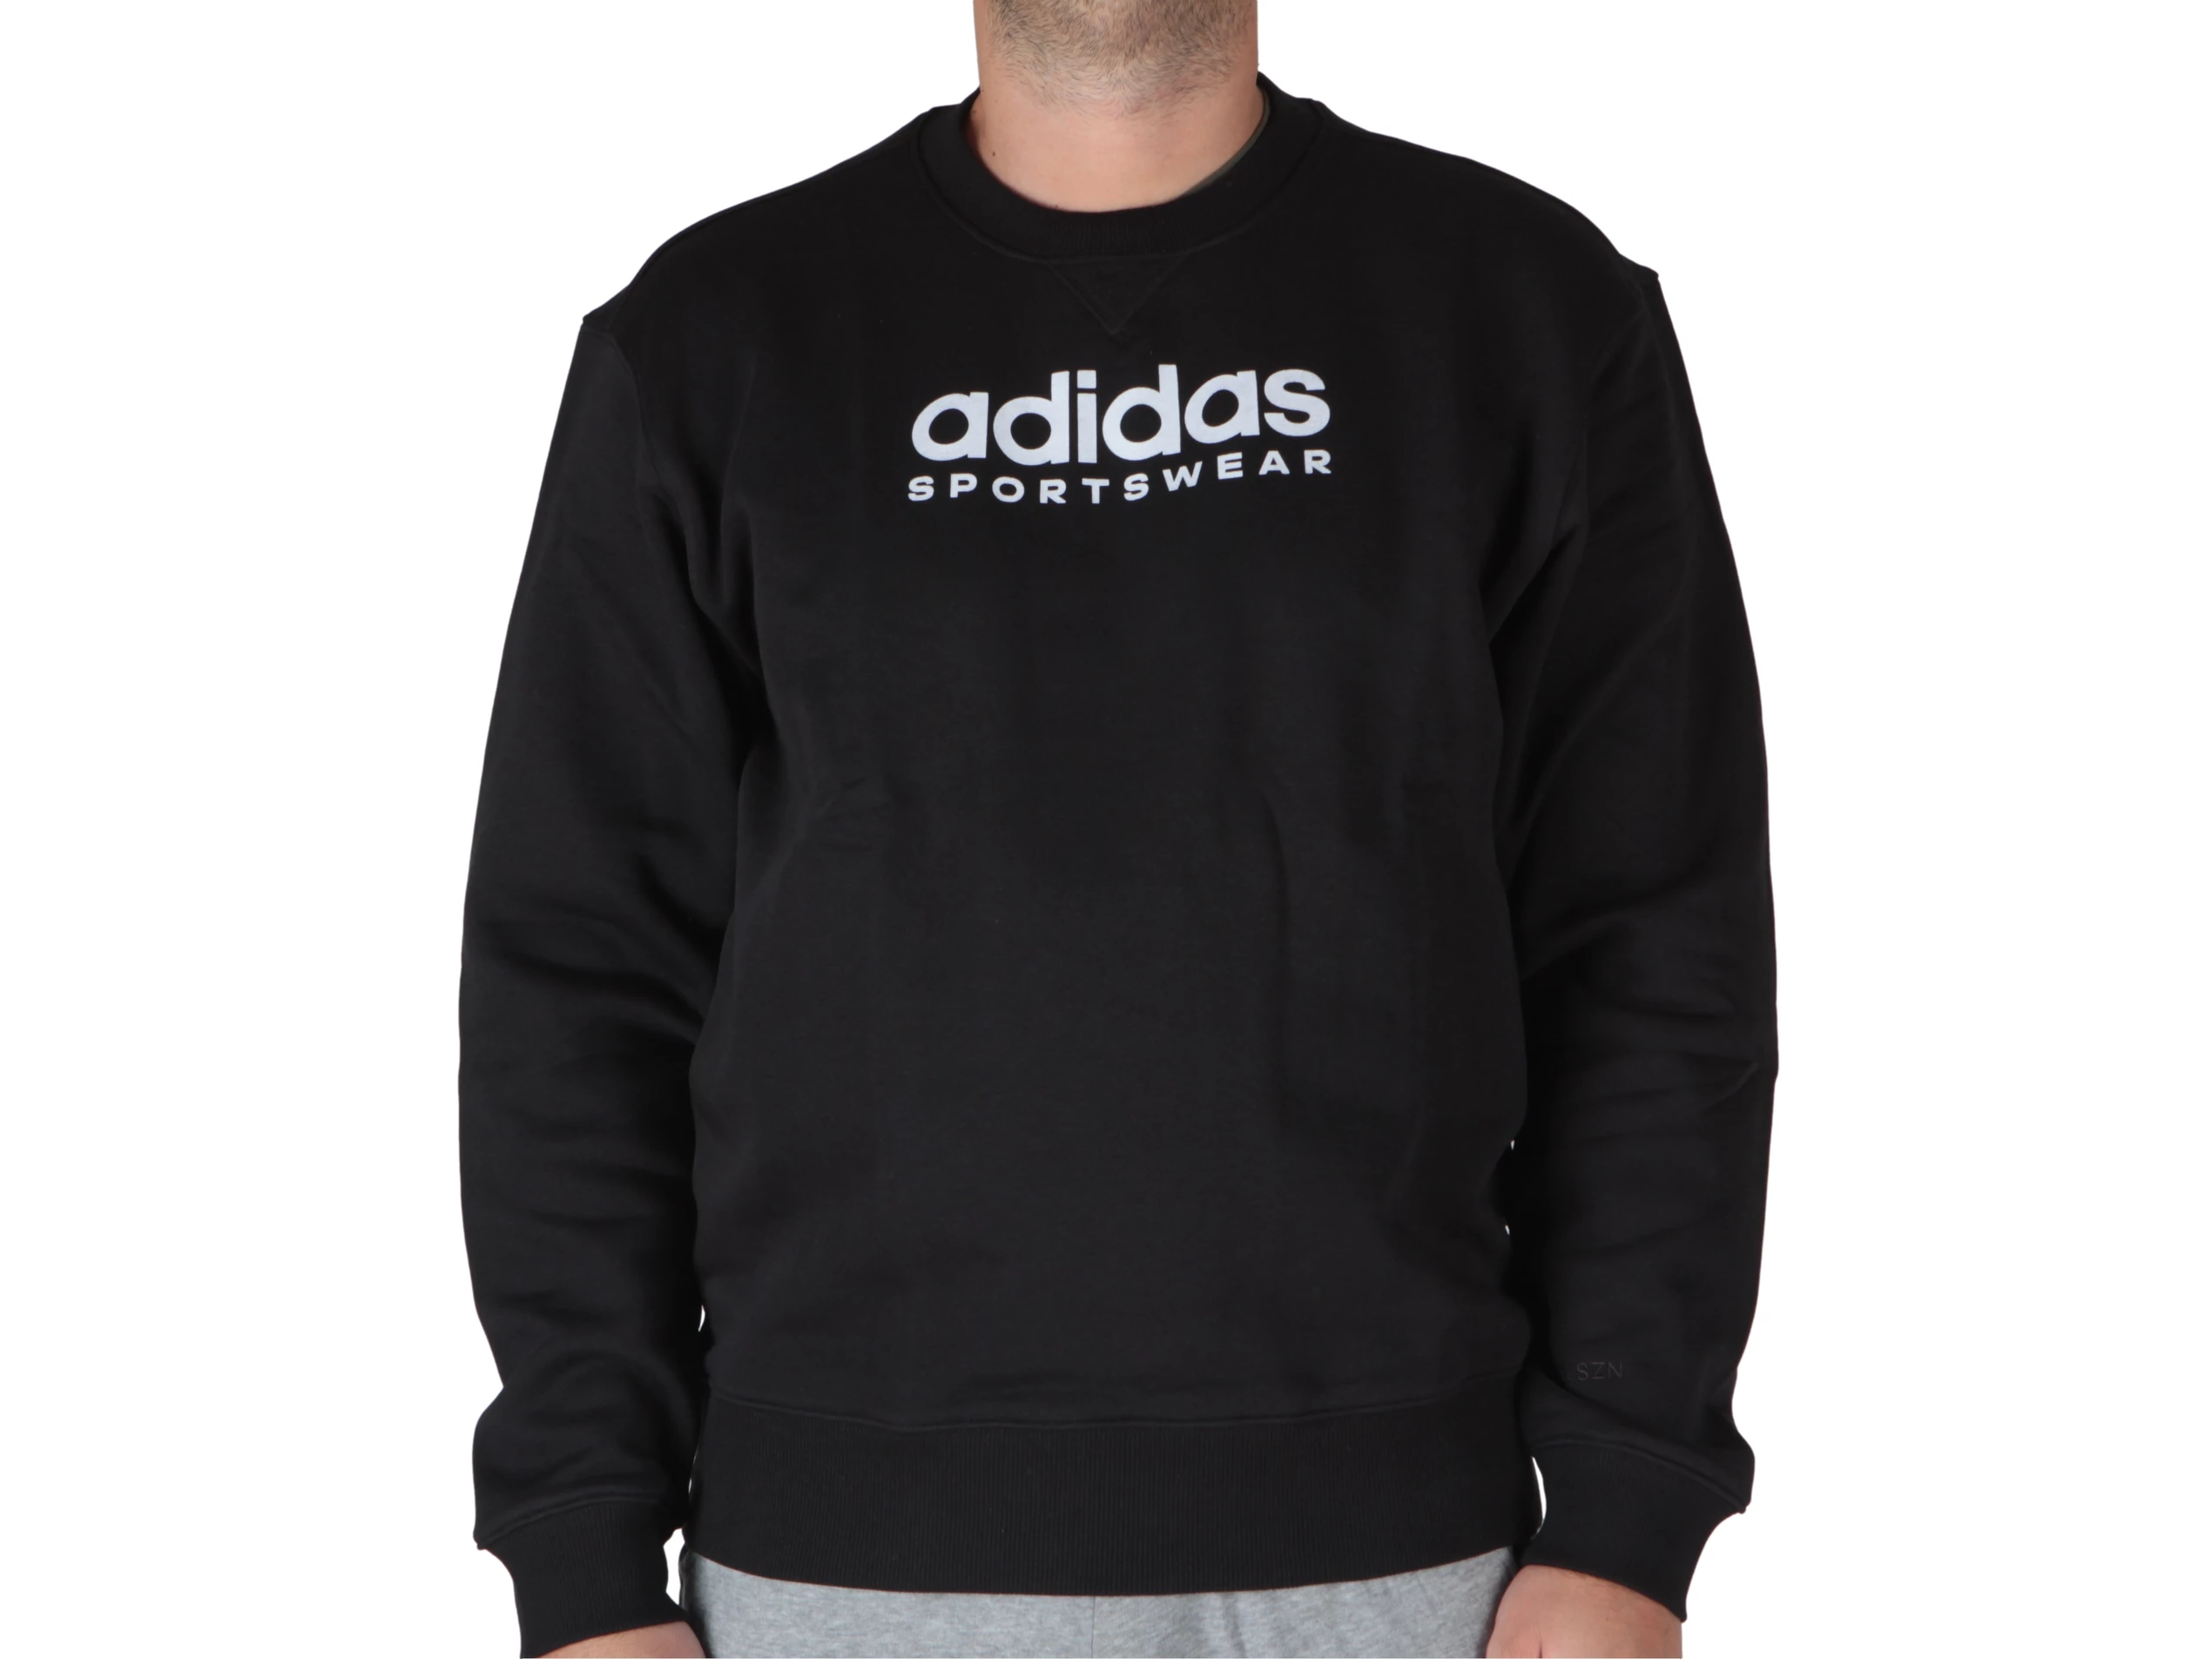 G man IC9824 All YOUSPORTY Szn Adidas | Swt M